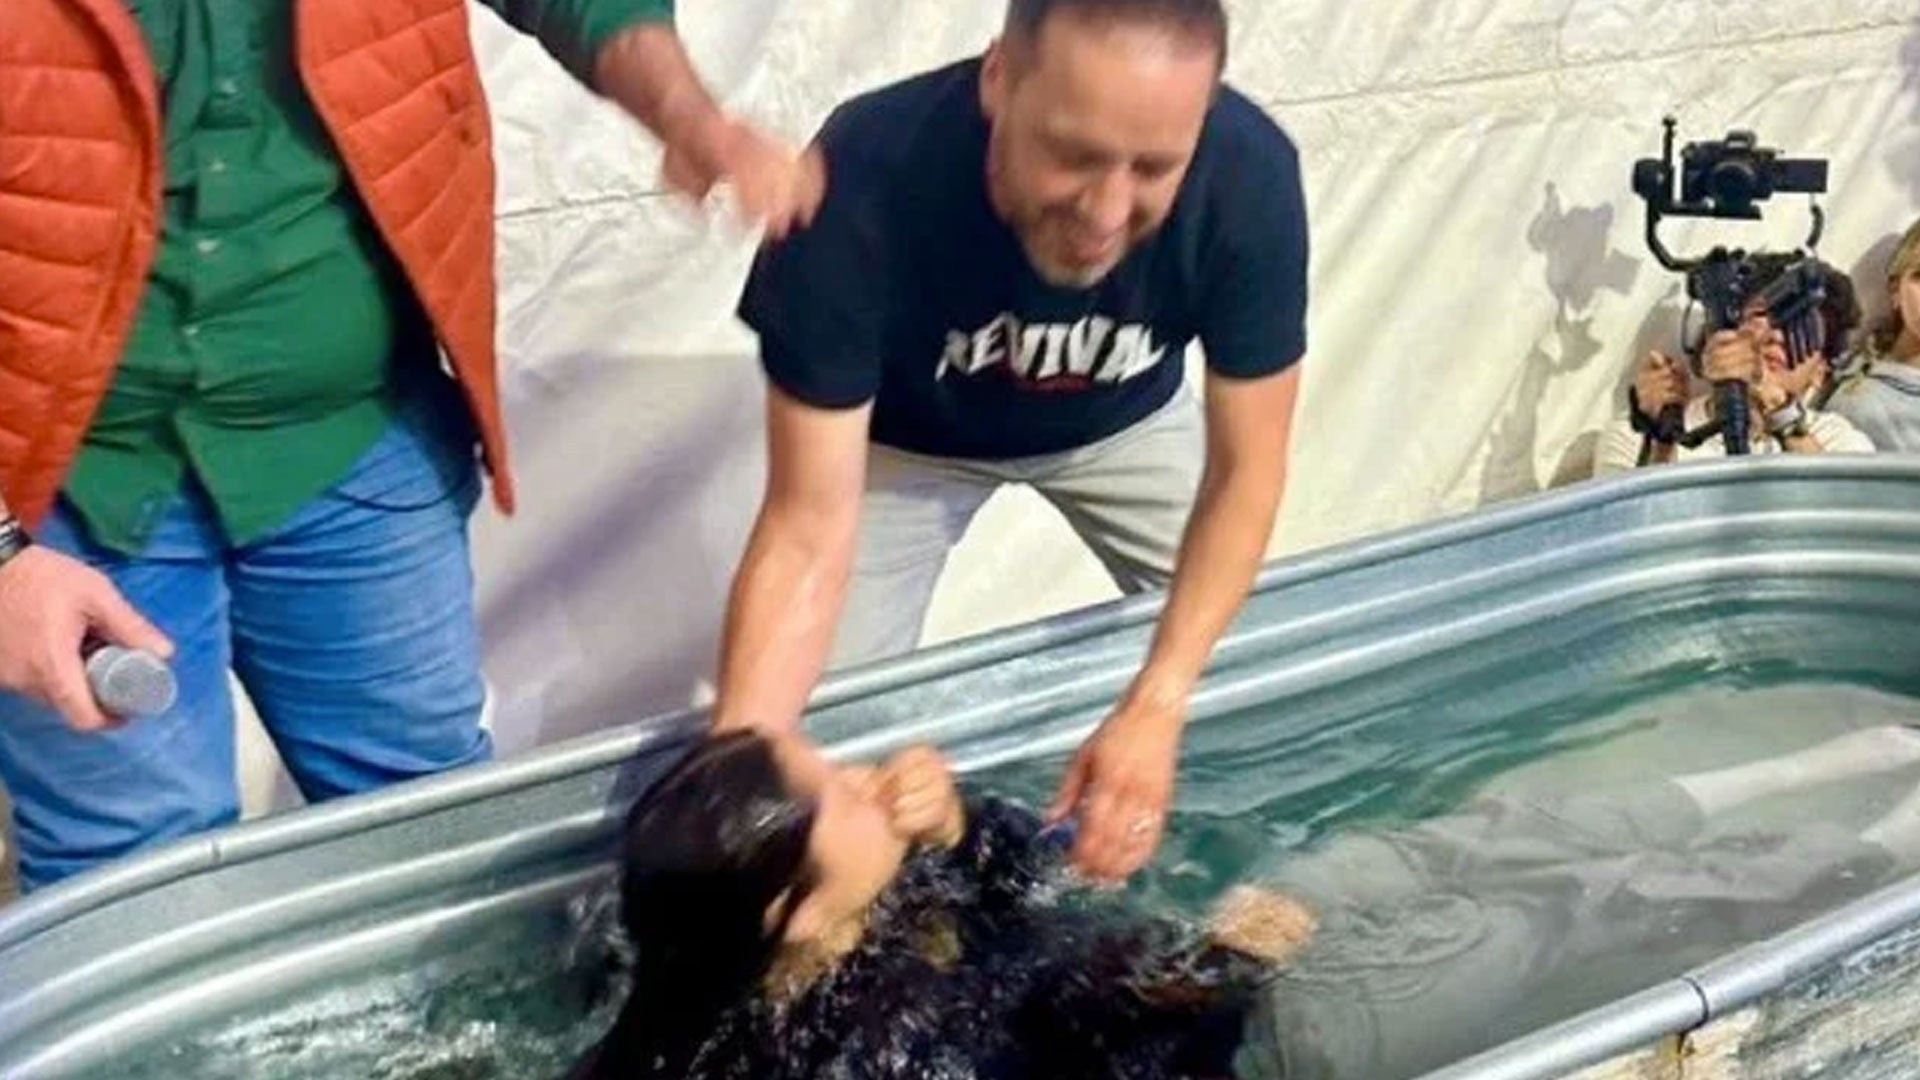 'Miracle': Massive Revival Effort on Southern Border Where Countless Are Being Baptized, Healed